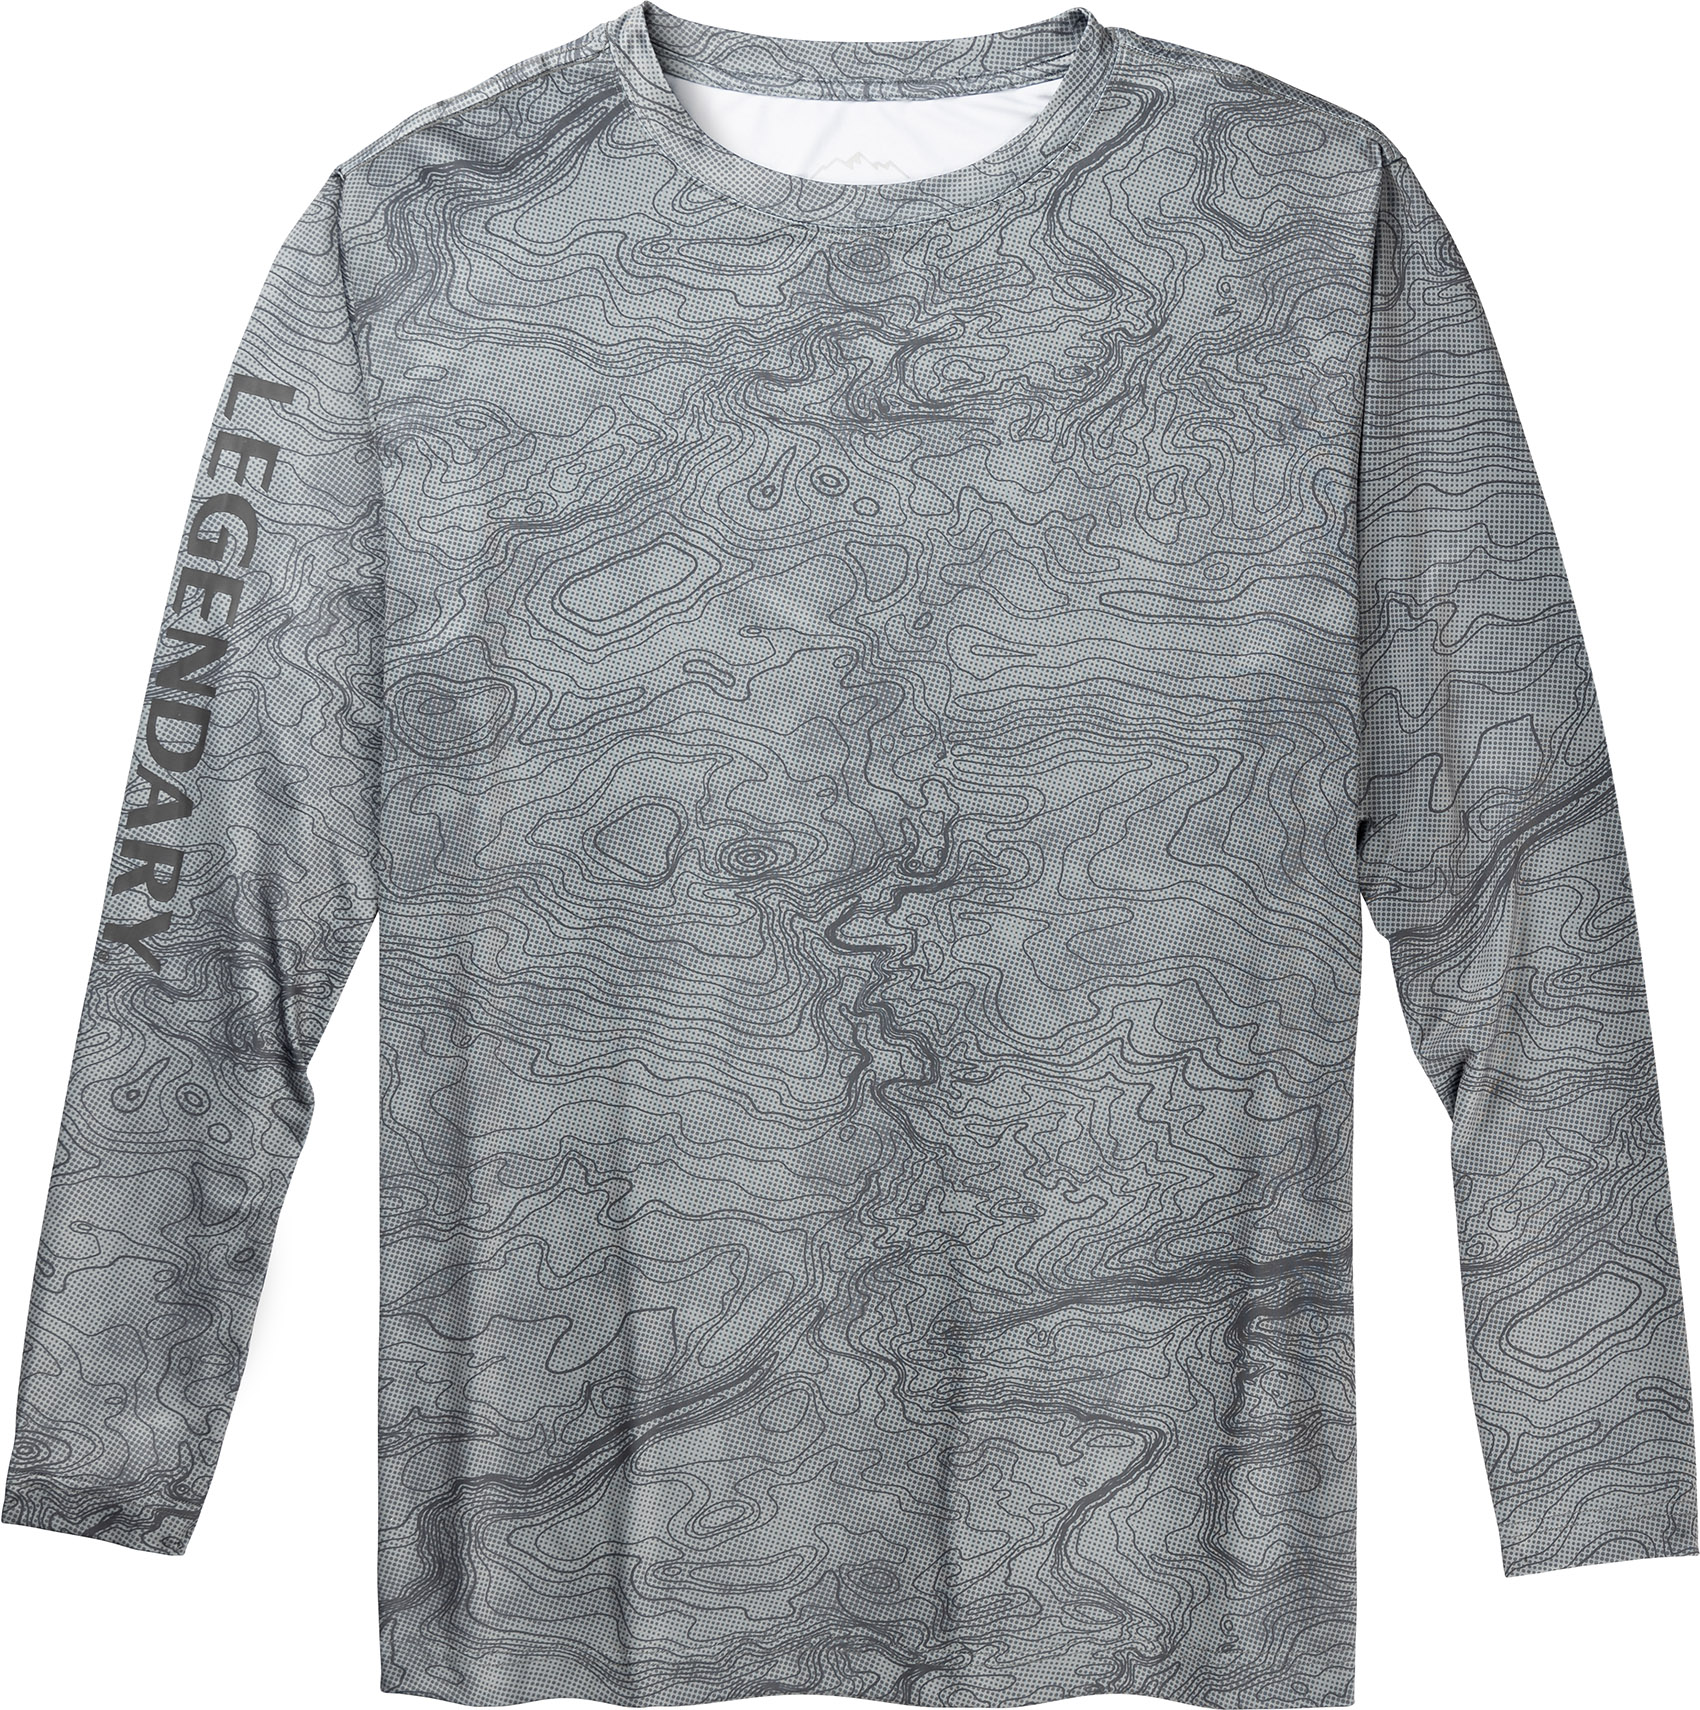 Legendary Whitetails Mens Moisture Wicking UPF Sun Protection Topographical Print Long Sleeve T-Shirt Cloudy Skies Trail Large Polyester/Spandex